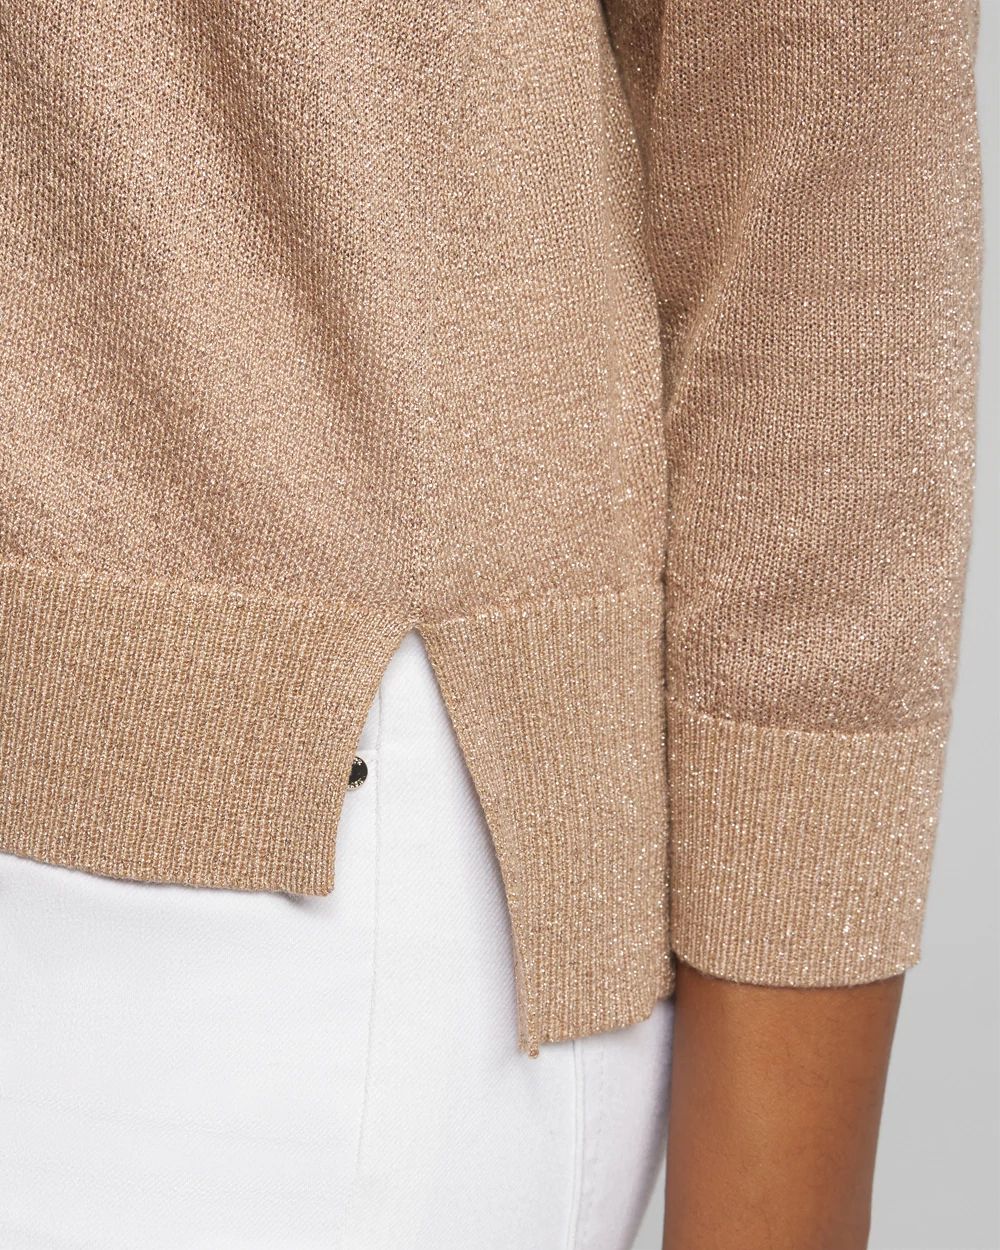 Outlet WHBM V-Neck Gold Sweater click to view larger image.